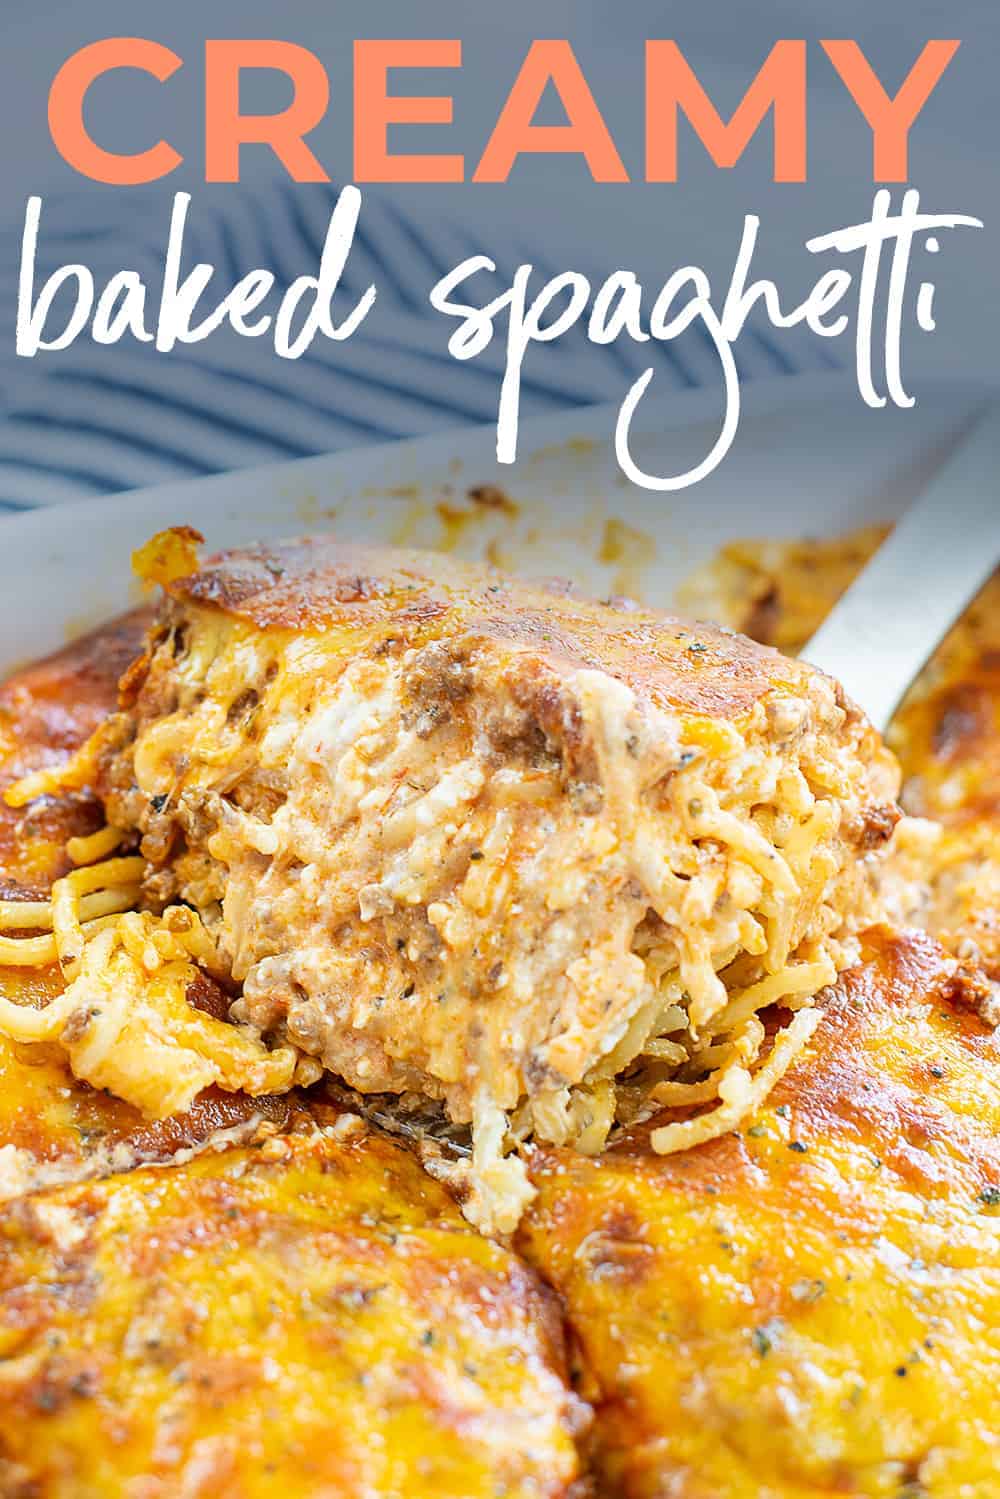 creamy baked spaghetti with text for Pinterest.